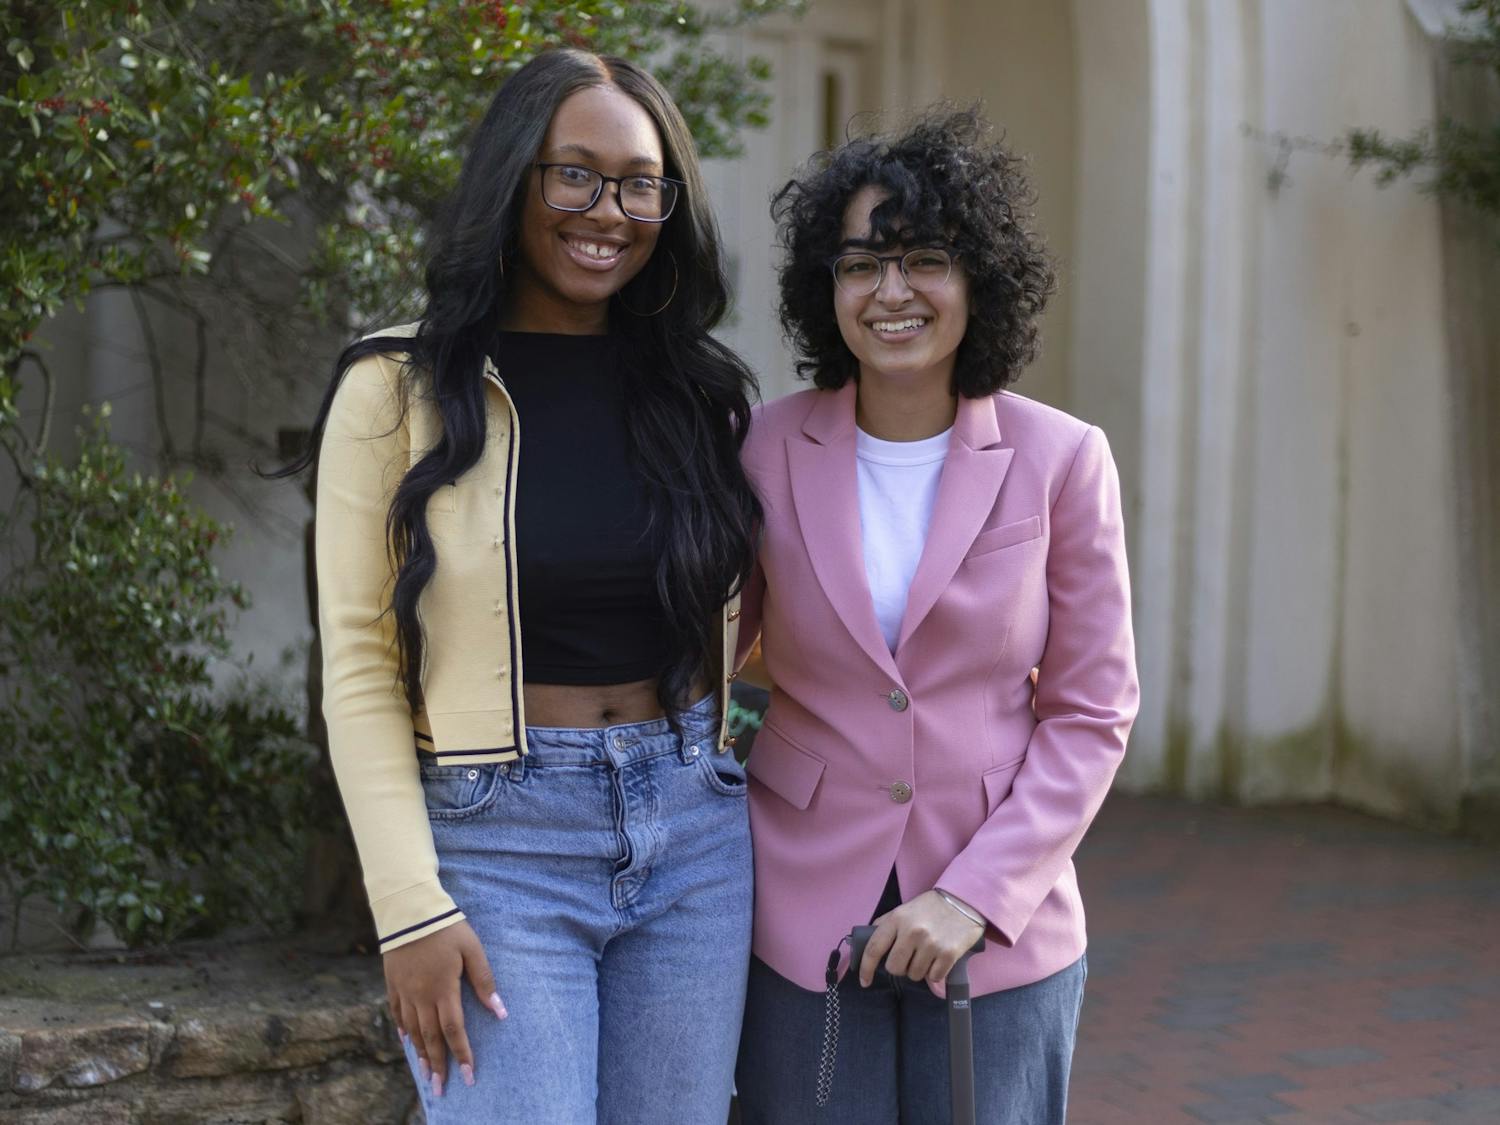 Imani Rankins and Karina Vasudeva pose in front of Campus Y on Tuesday, Feb. 21, 2023 at Chapel Hill, N.C. Rankins and Vasudeva are the newly elected Campus Y co-presidents.